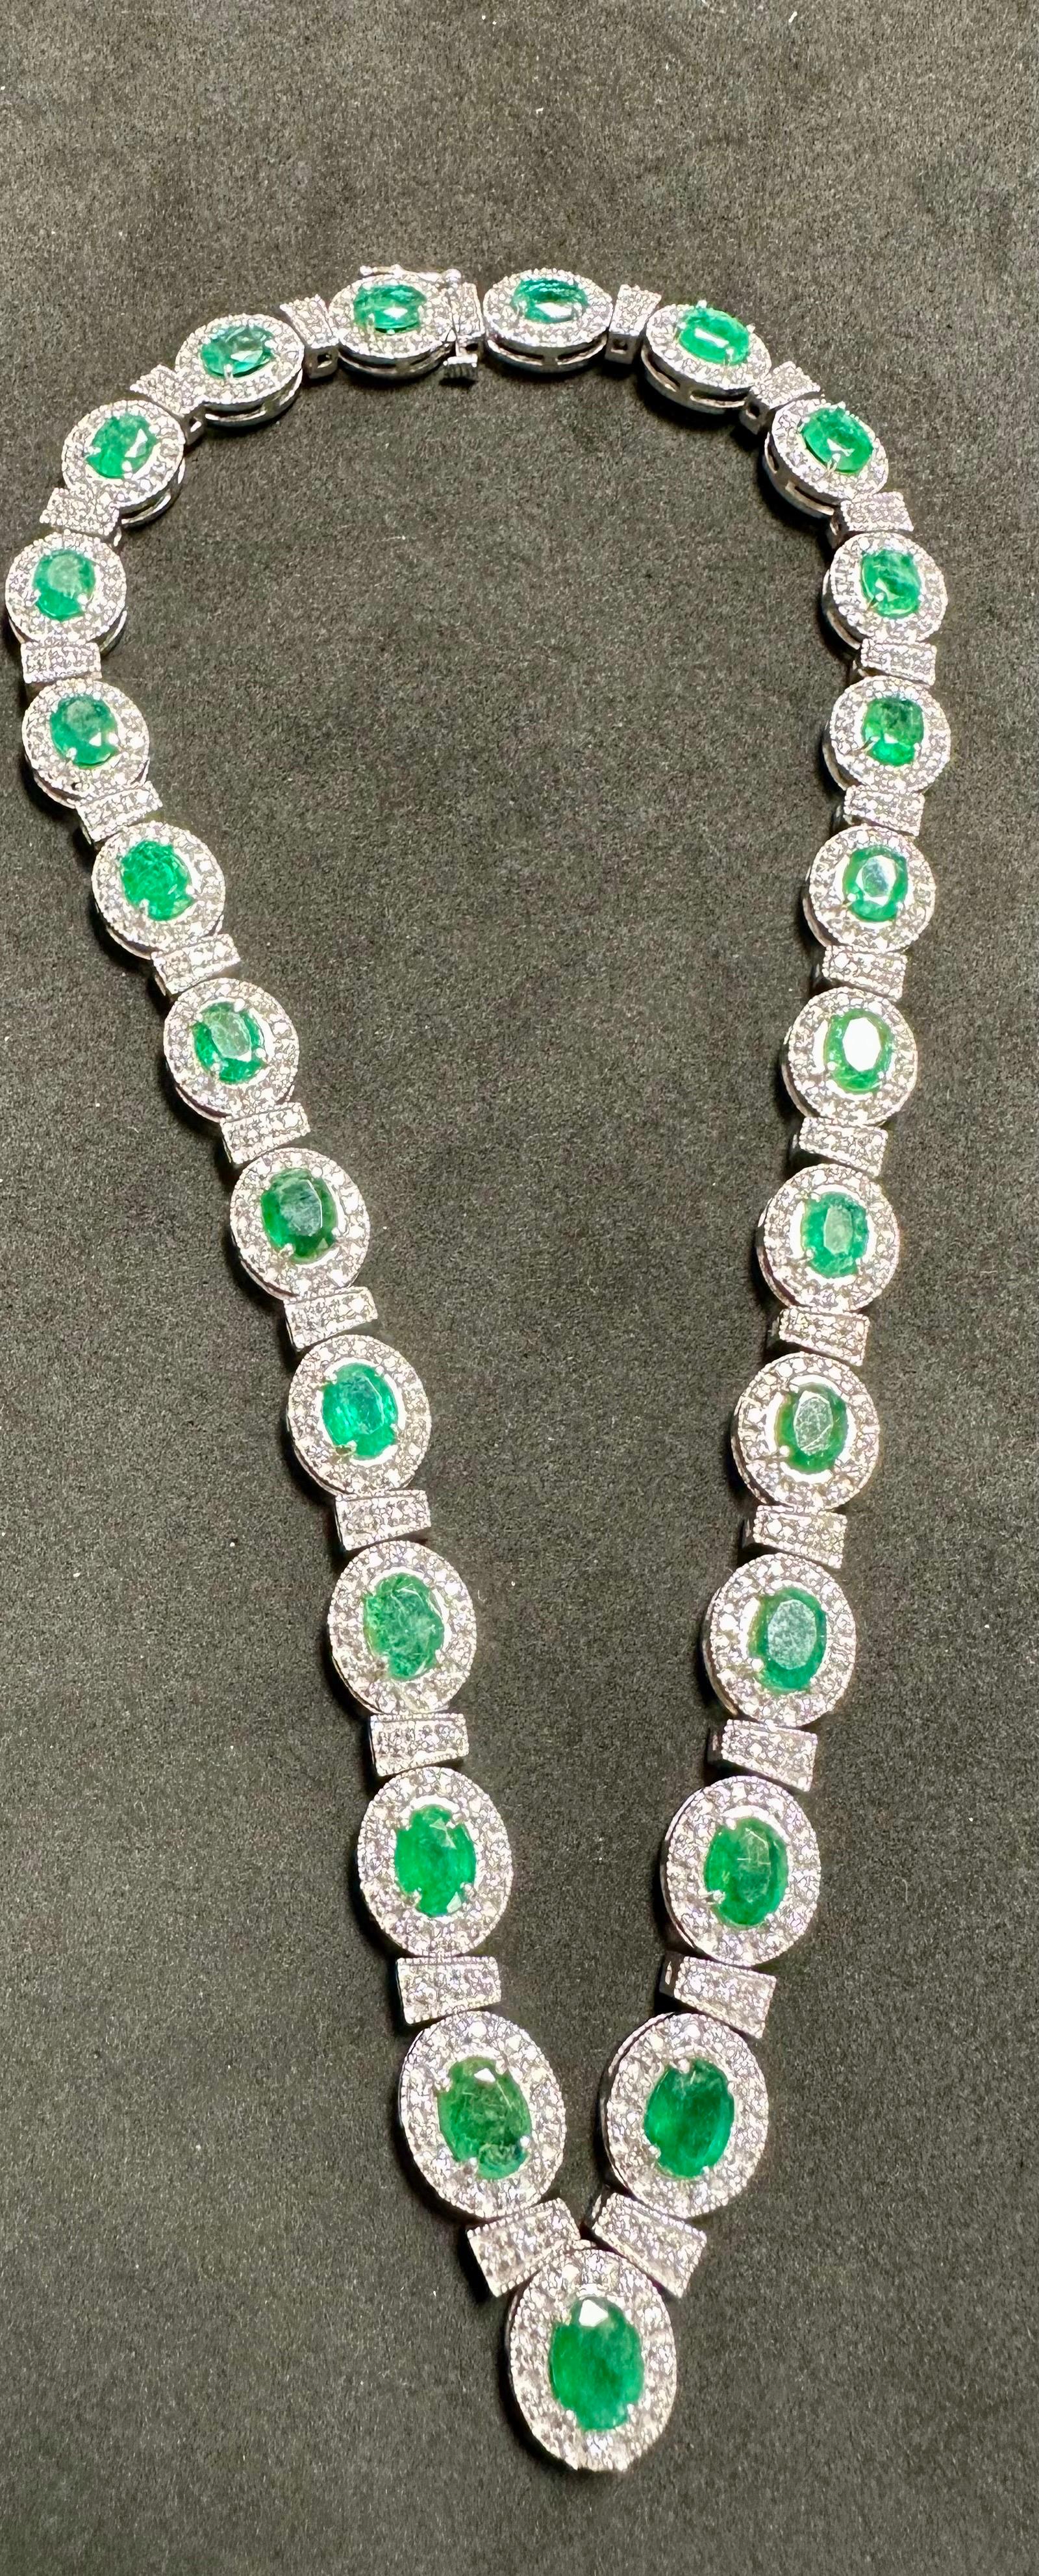 28 Carat Oval Shape Natural Emerald & 5 Carat Diamond Necklace in 14 Karat Gold In Excellent Condition For Sale In New York, NY